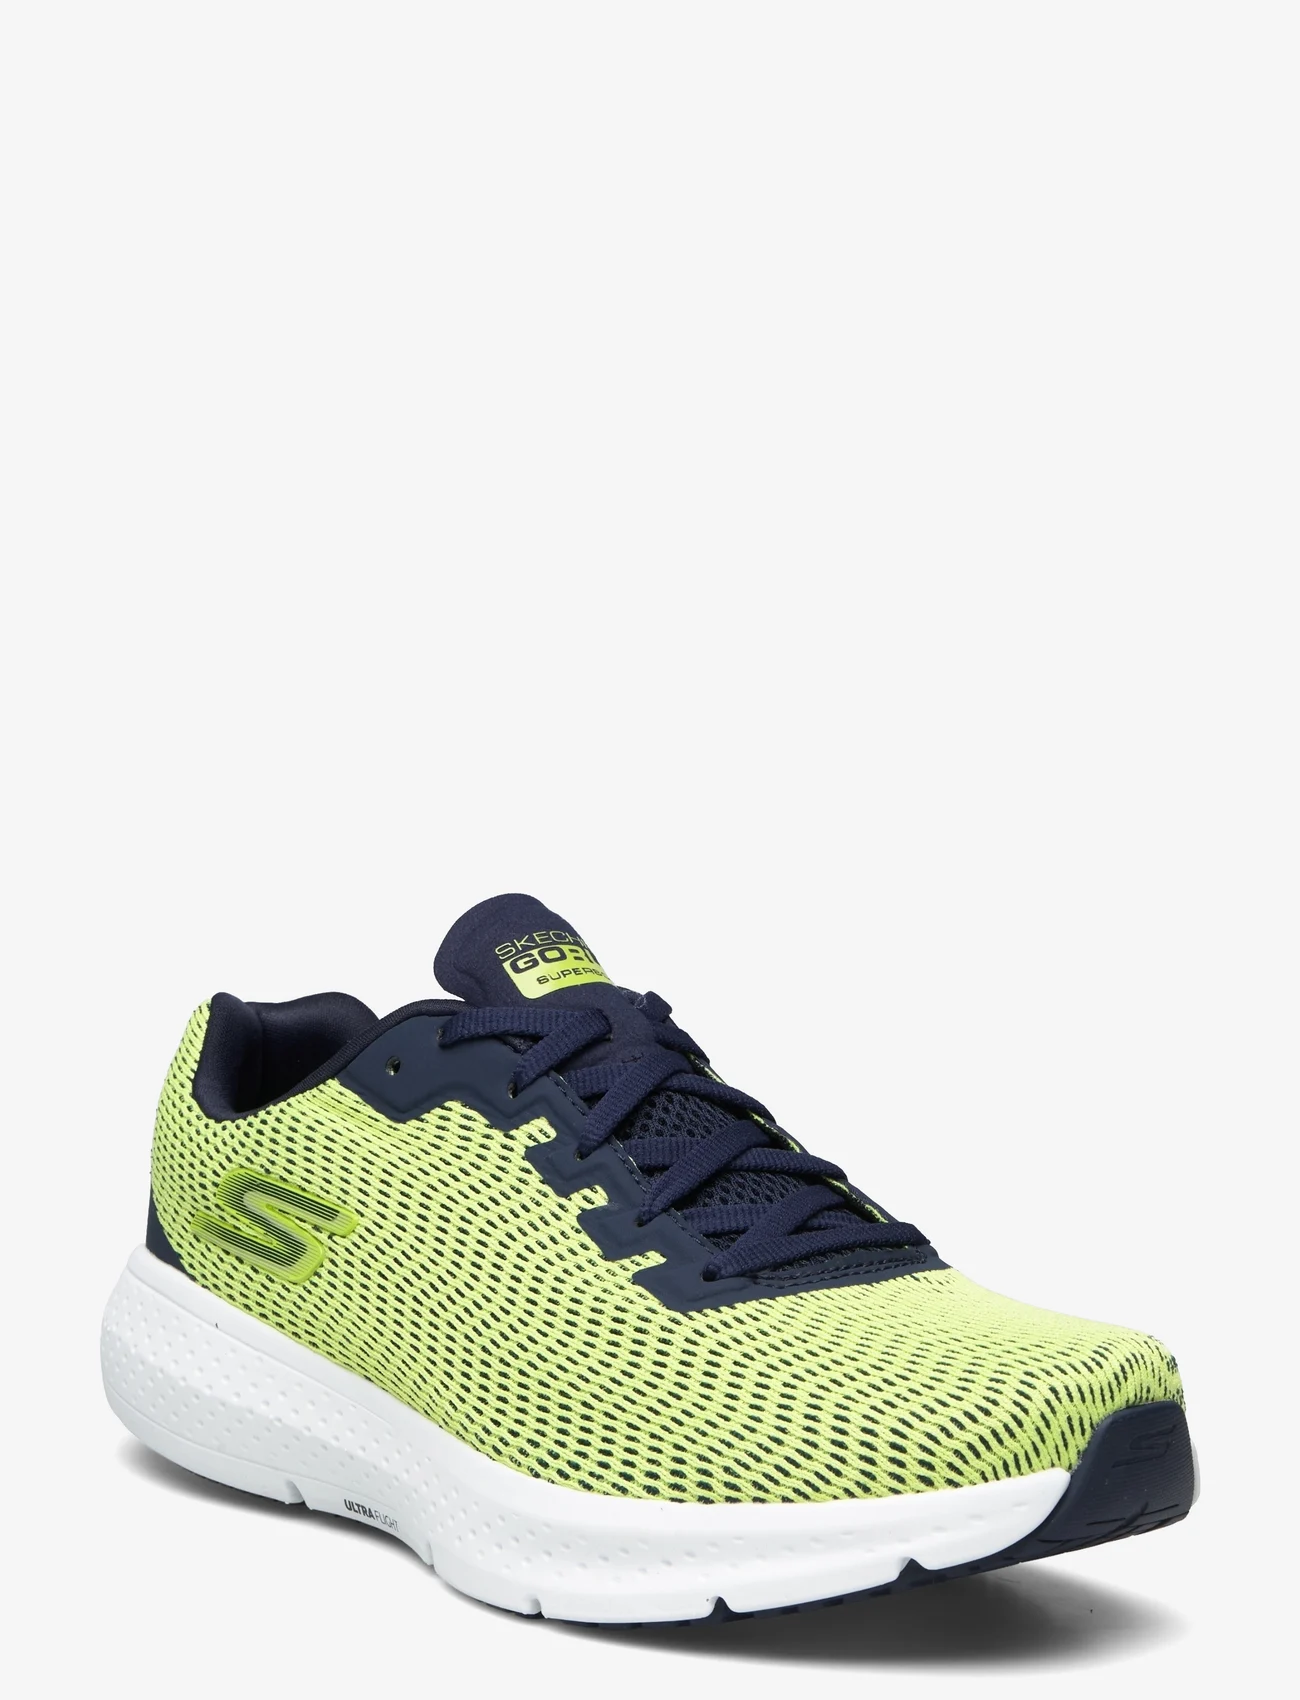 Skechers - Mens Go Run Supersonic  - Relaxed Fit - løbesko - ylnv yellow navy - 0